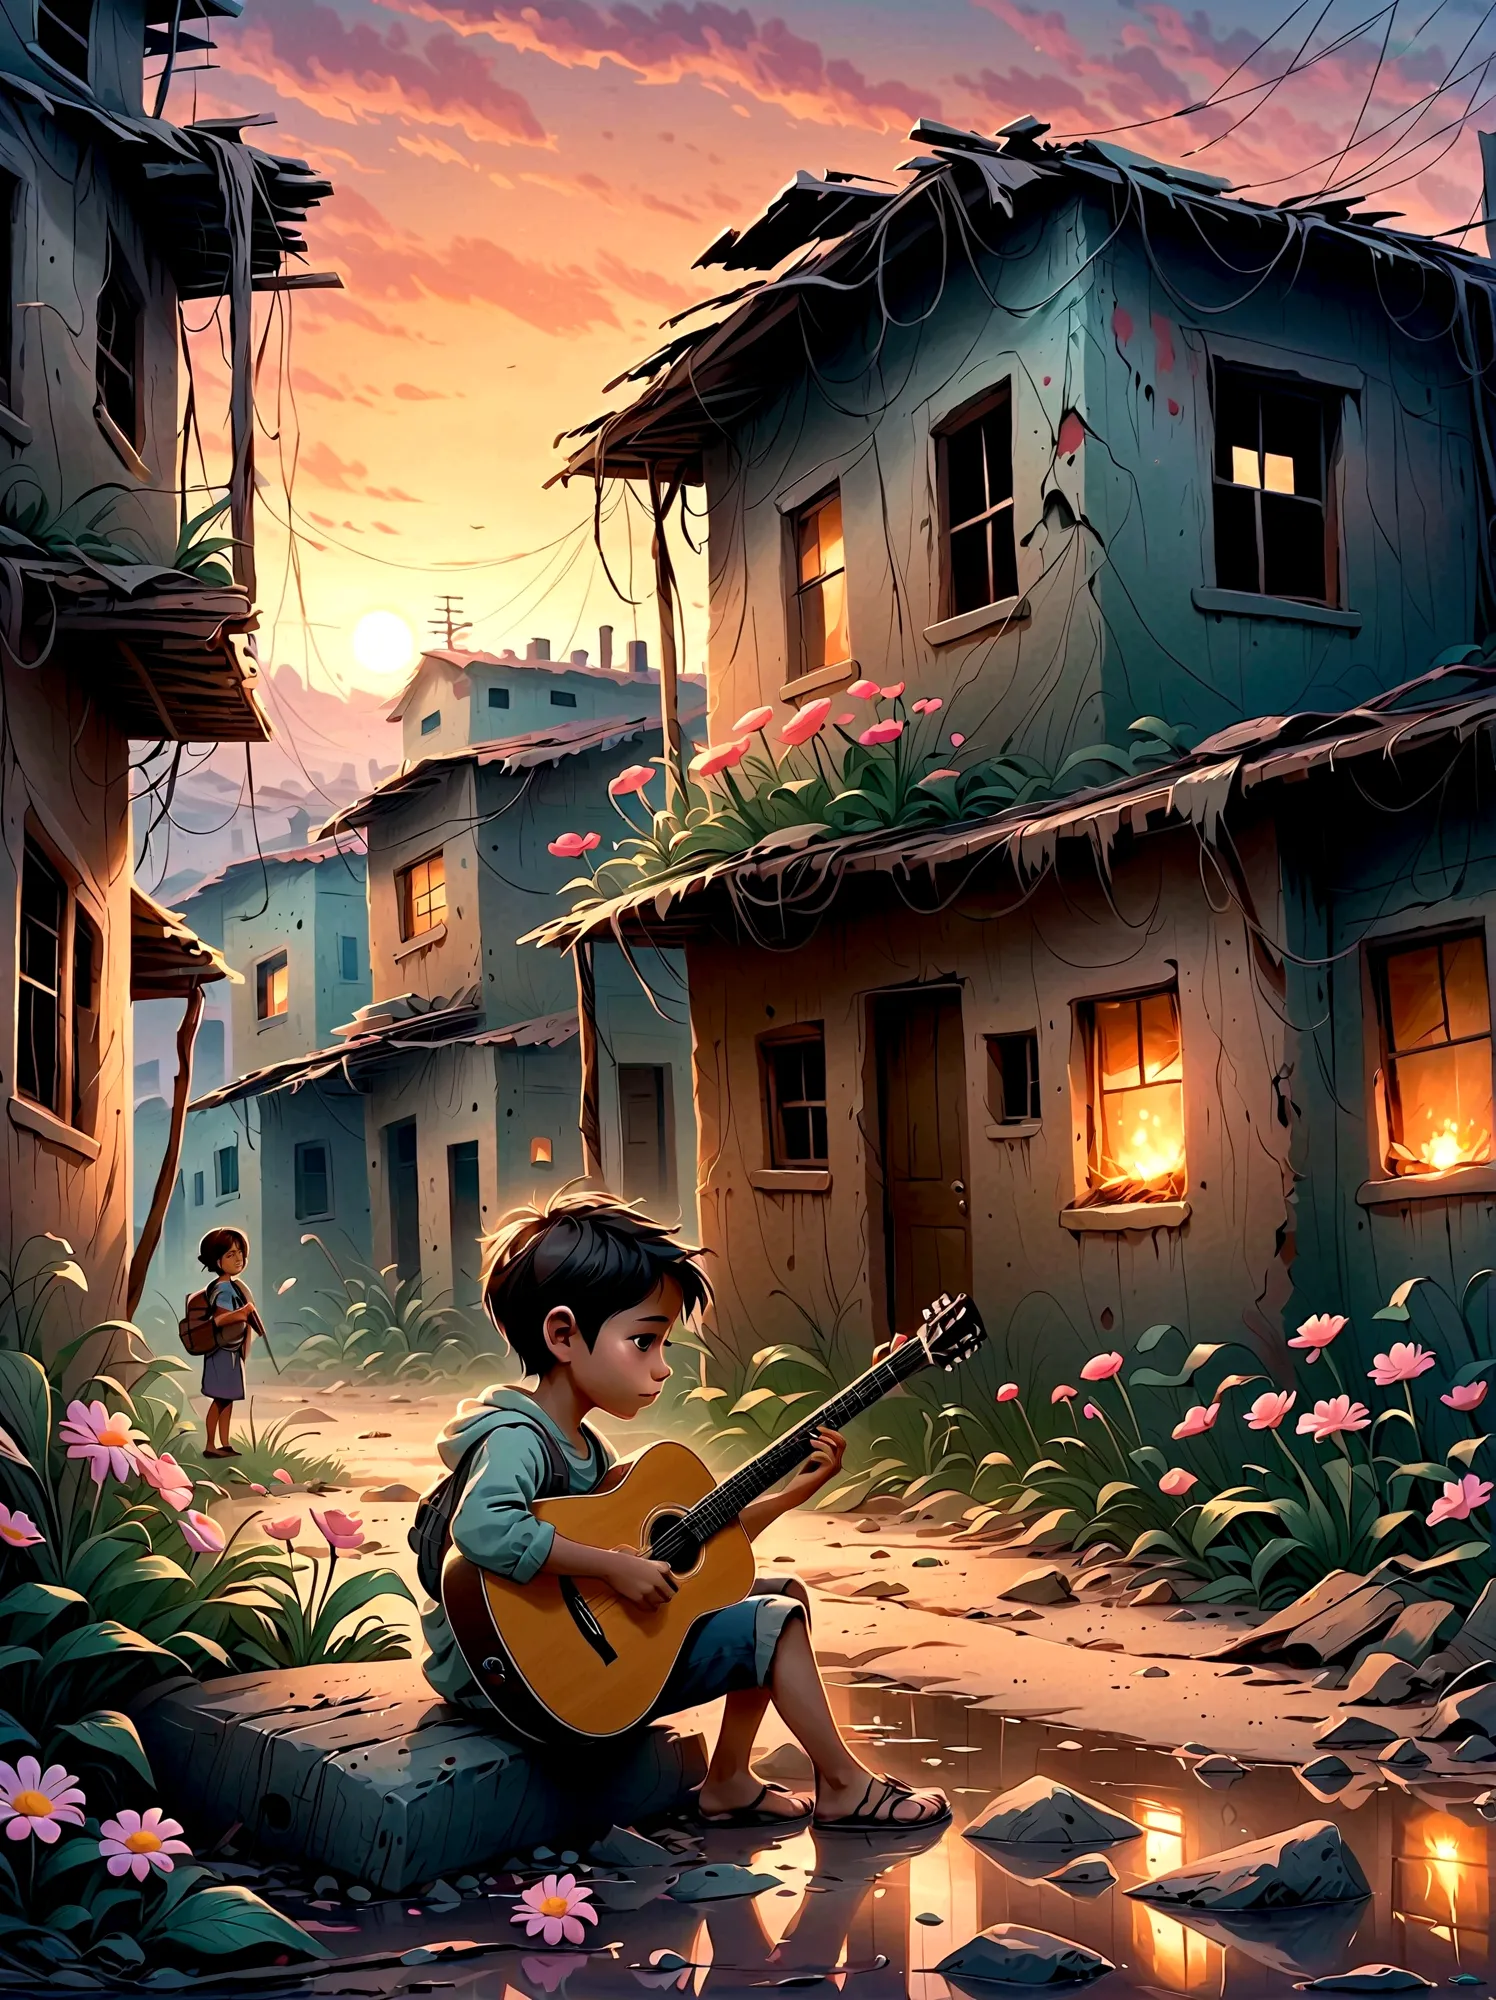 In the midst of a war-torn, smoky ruin, a child is playing a guitar, (A tenacious little flower grows at the child&#39;s feet), ...